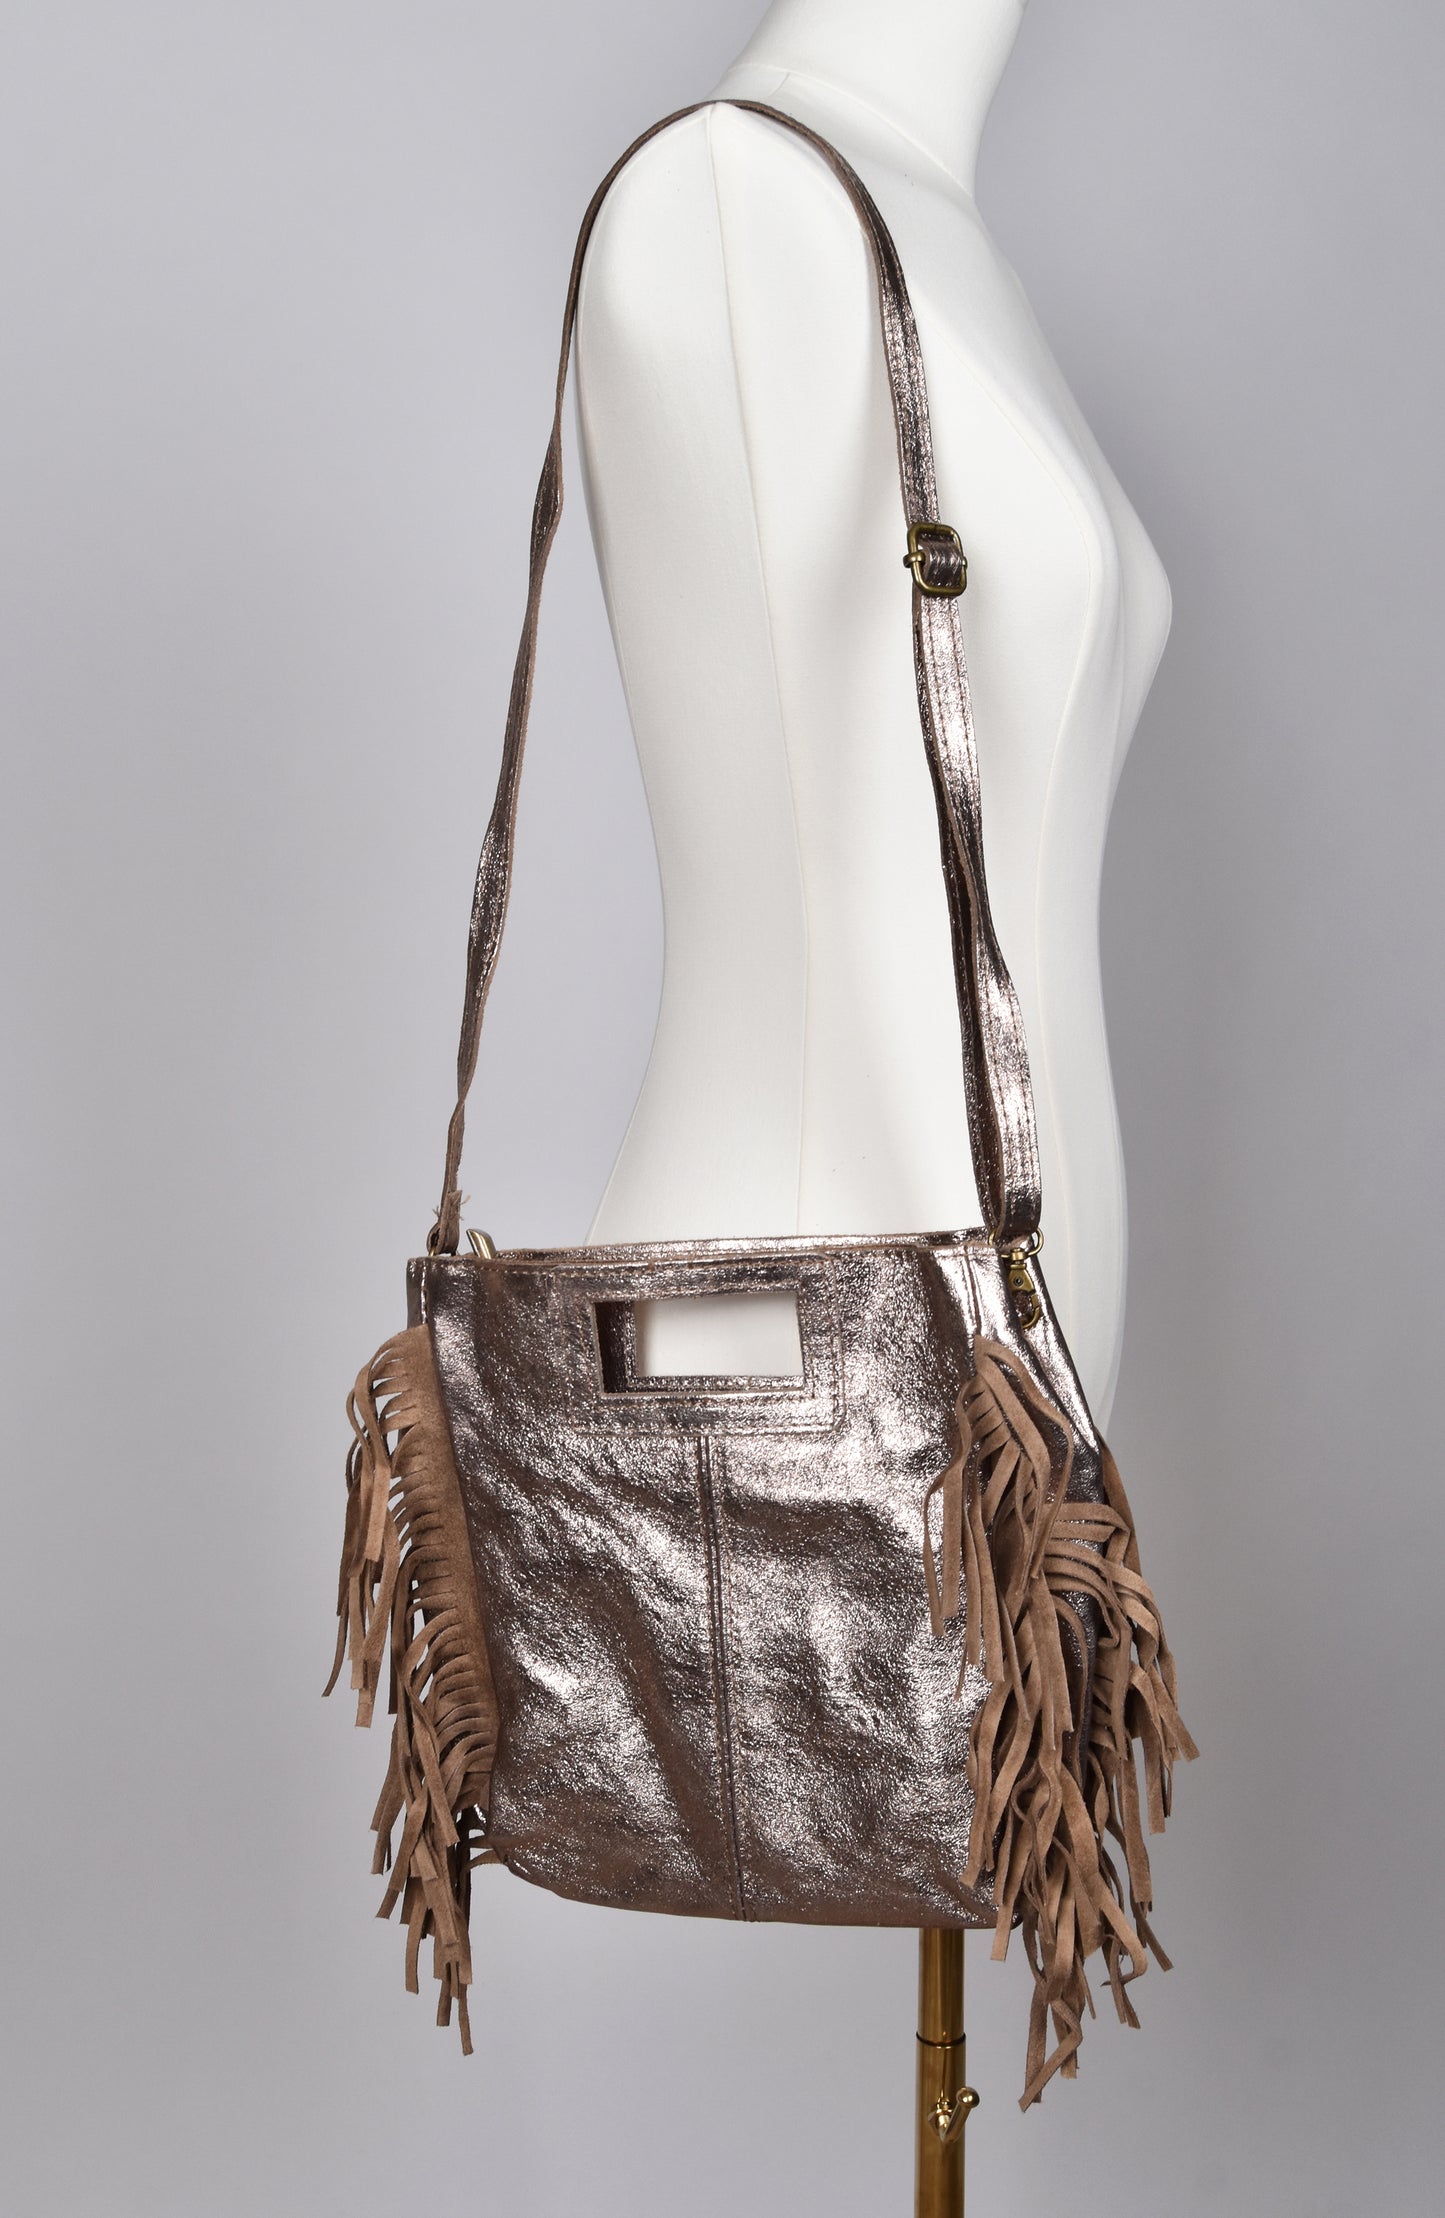 Sac franges camel shiny 100% cuir - Made in Italie